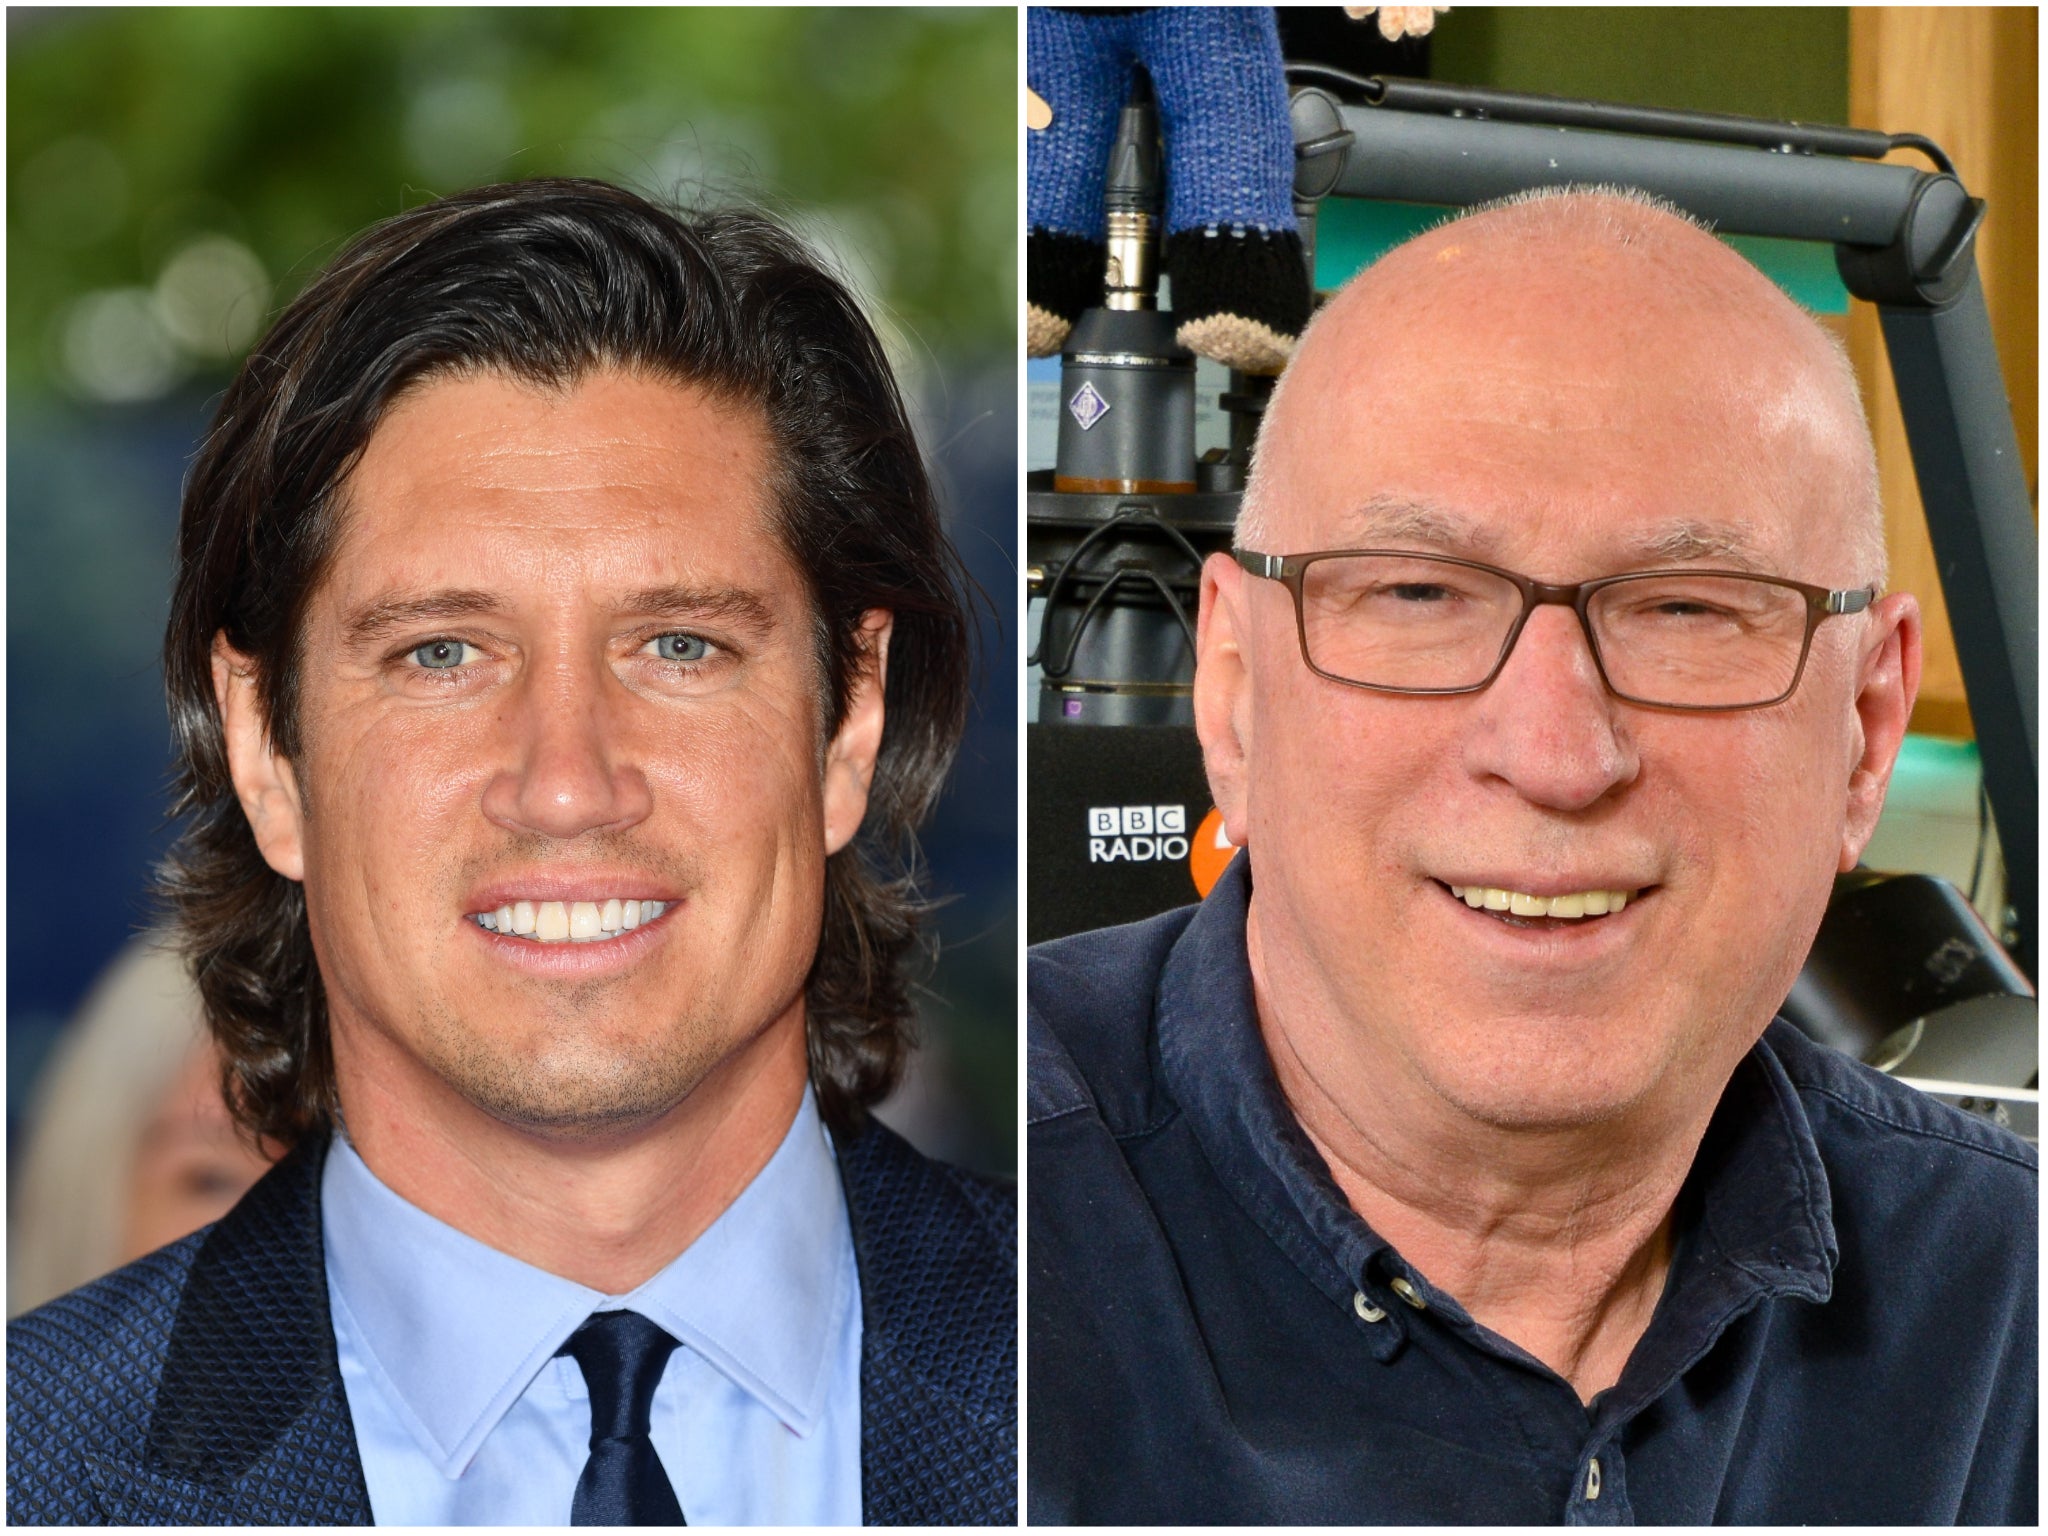 Vernon Kay and Ken Bruce